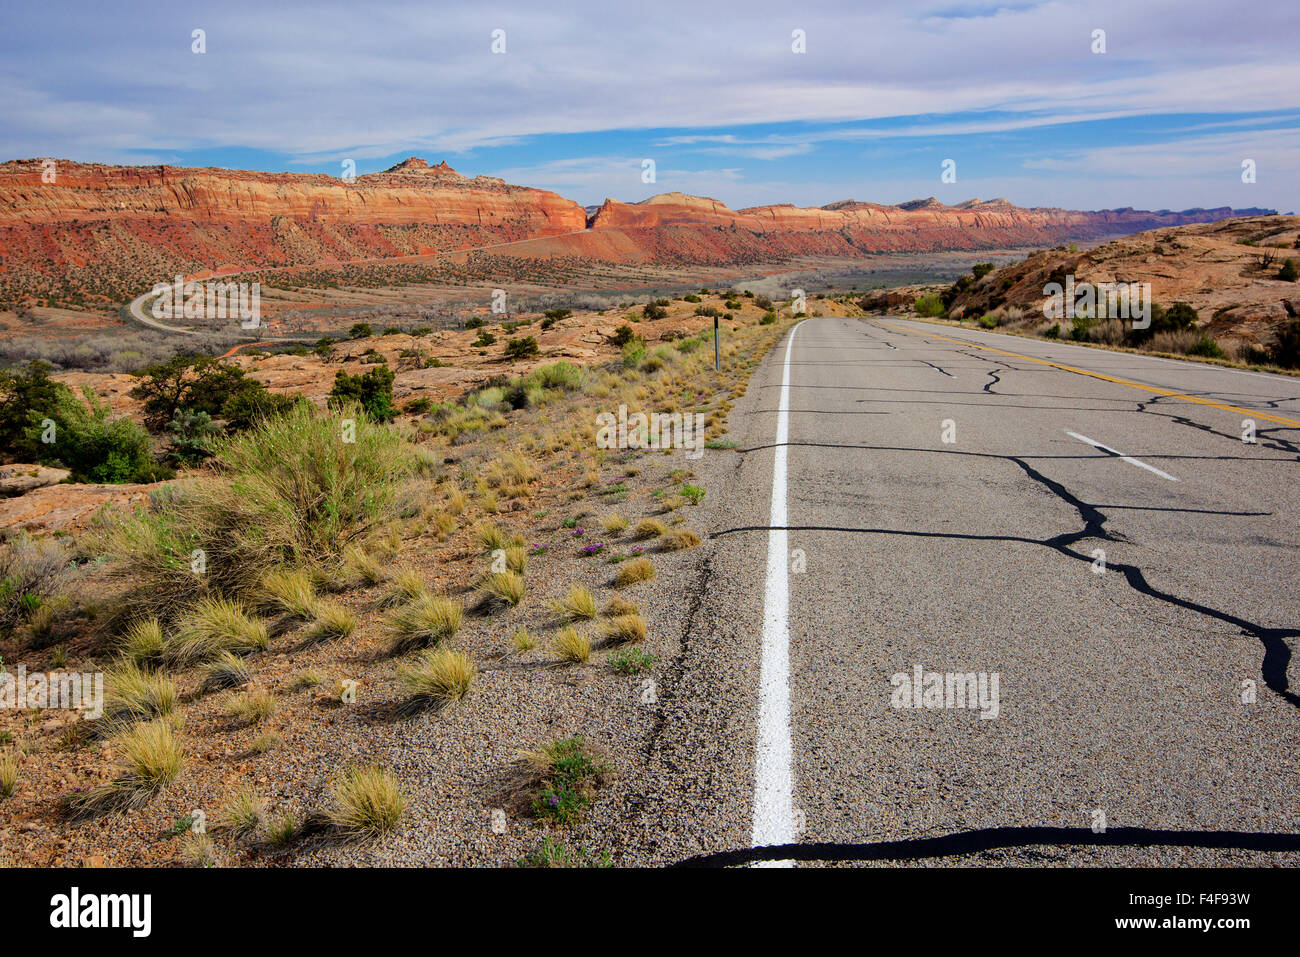 Utah Highway 95 at Comb Ridge, a dramatic uplift west of Blanding, The ridge is the site of numerous ancient ruins and dramatic geological formations. (Large format sizes available) Stock Photo